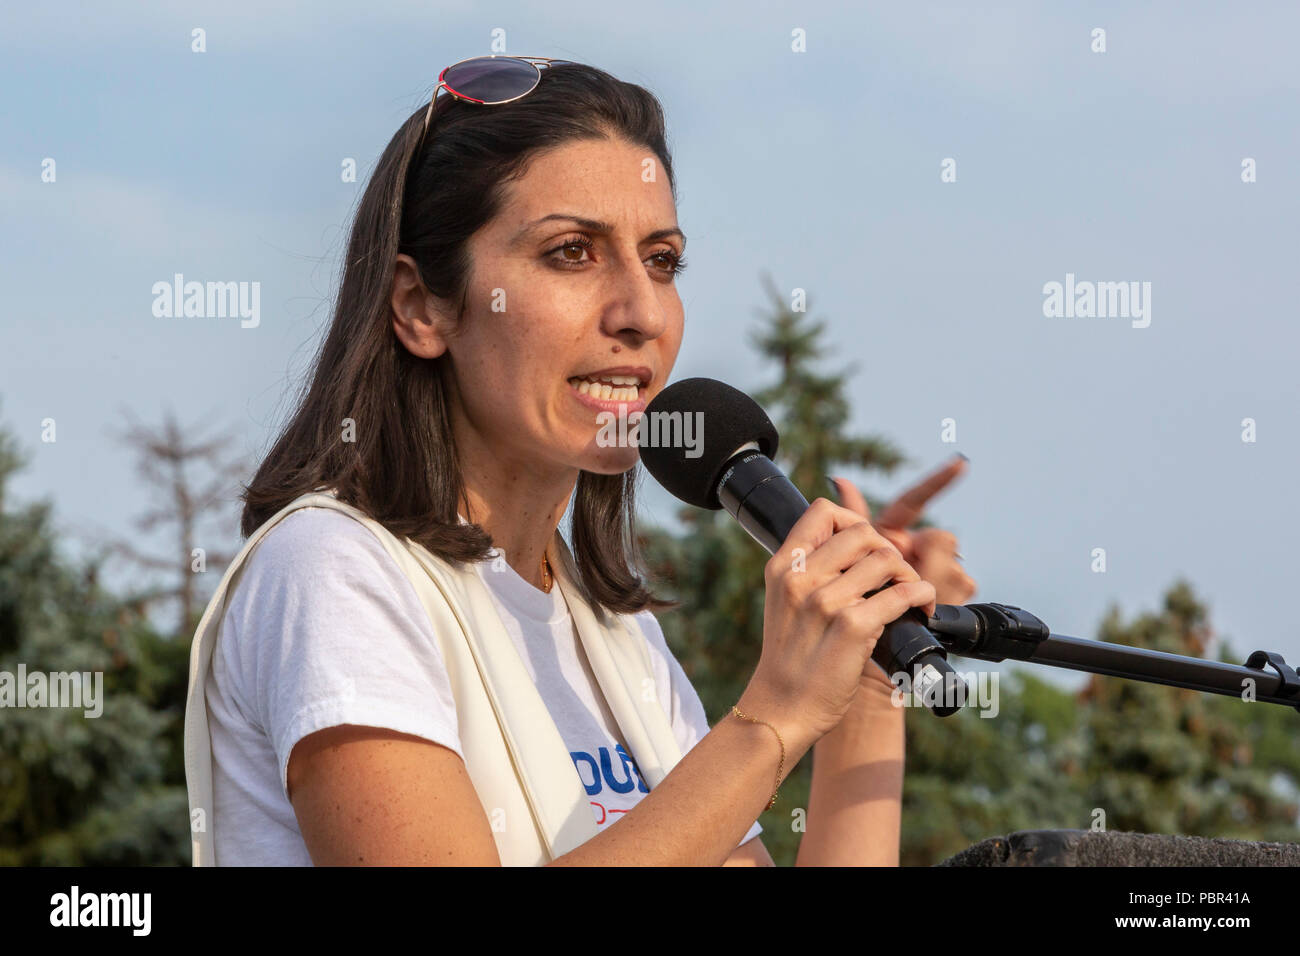 Dearborn, Michigan USA - 29 July 2018 - Fayrouz Saad speaks at a Muslim Get Out the Vote rally, sponsored by several Muslim community organizations. Saad, the daughter of Lebanese immigrants, is running for Congress in Michigan's 11th Congressional District. Credit: Jim West/Alamy Live News Stock Photo